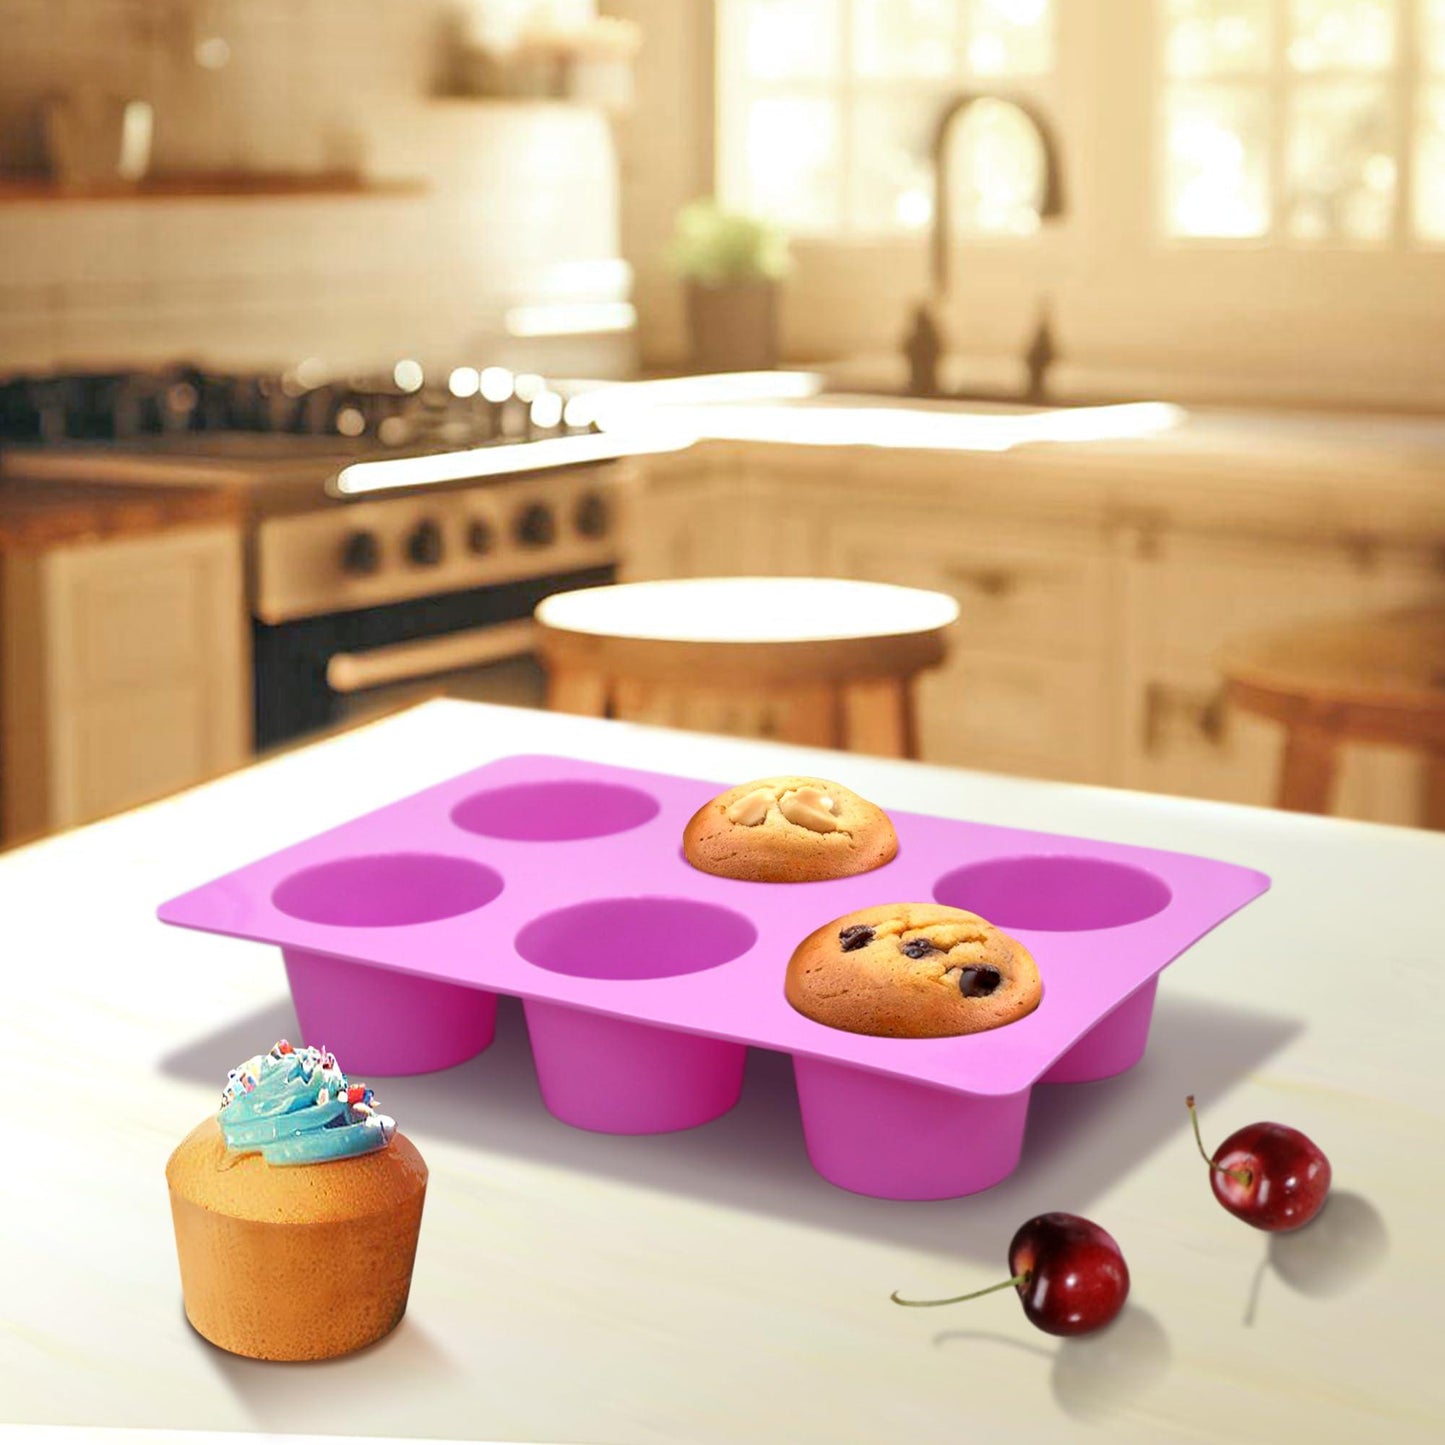 Amazing Abby - 11" x 7.5" Silicone Muffin Pan (Set of 3), 6-Cup Easy-Release Baking Mold for Homemade Muffins and Cupcakes, Heat-Resistant, Non-Stick, BPA-Free, Dishwasher-Safe, Purple Shades - CookCave